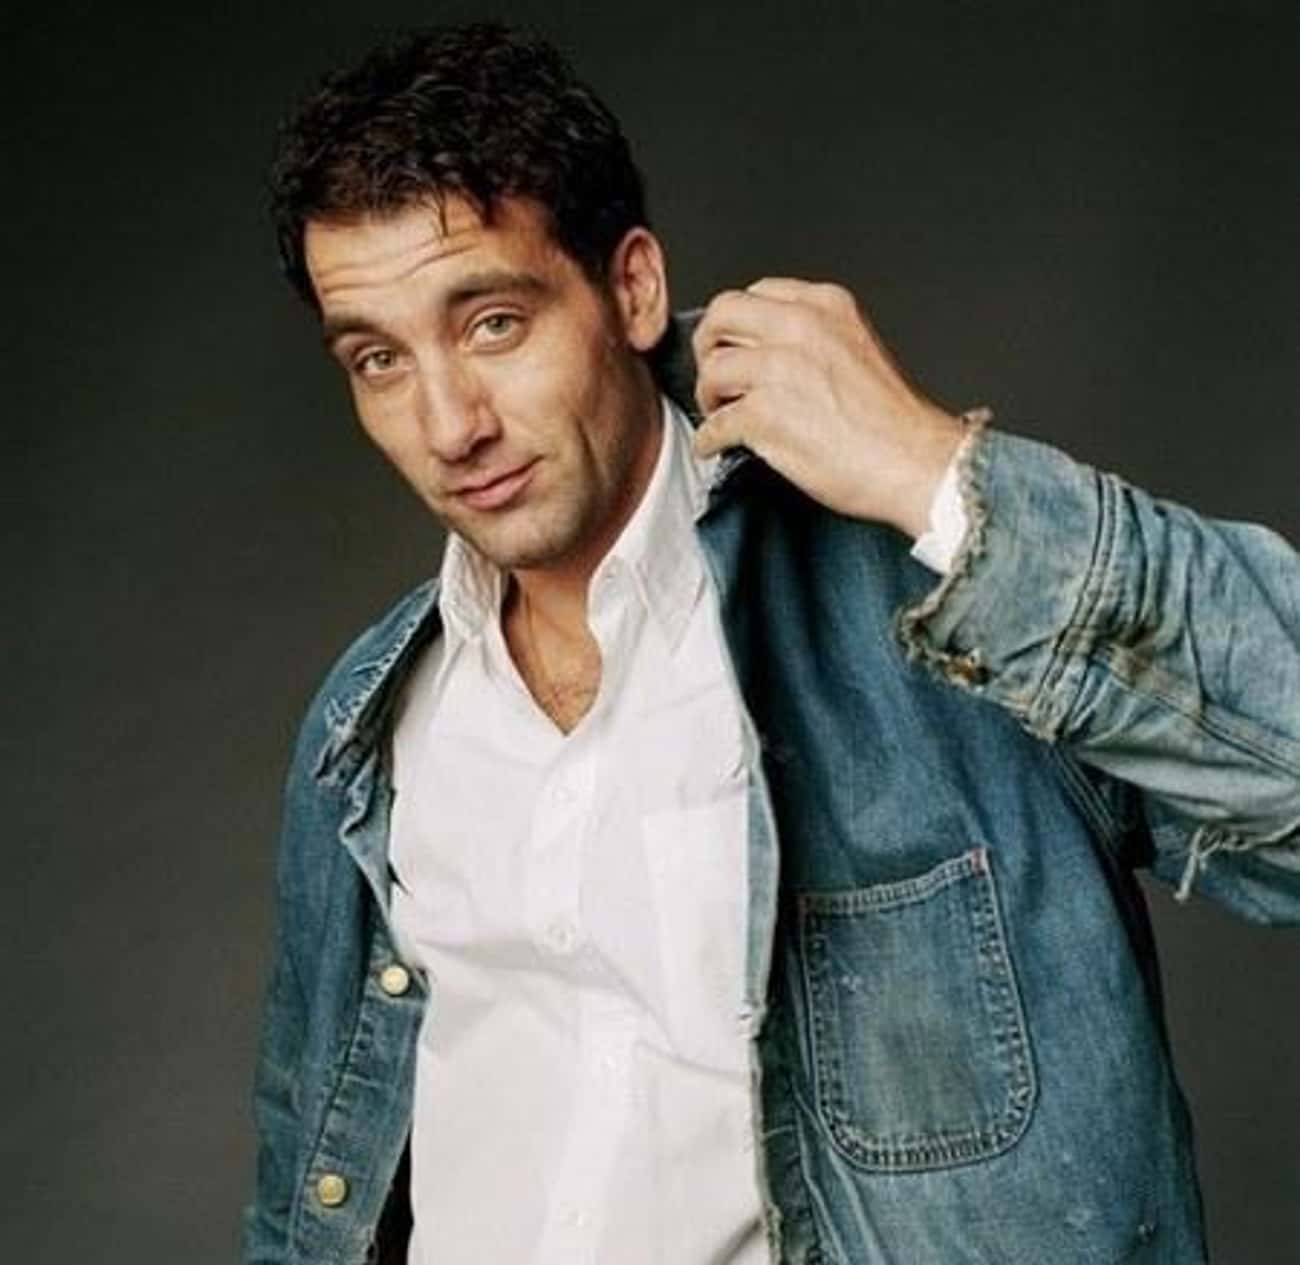 Clive Owen in White Long Sleeves and Faded Denim Jacket